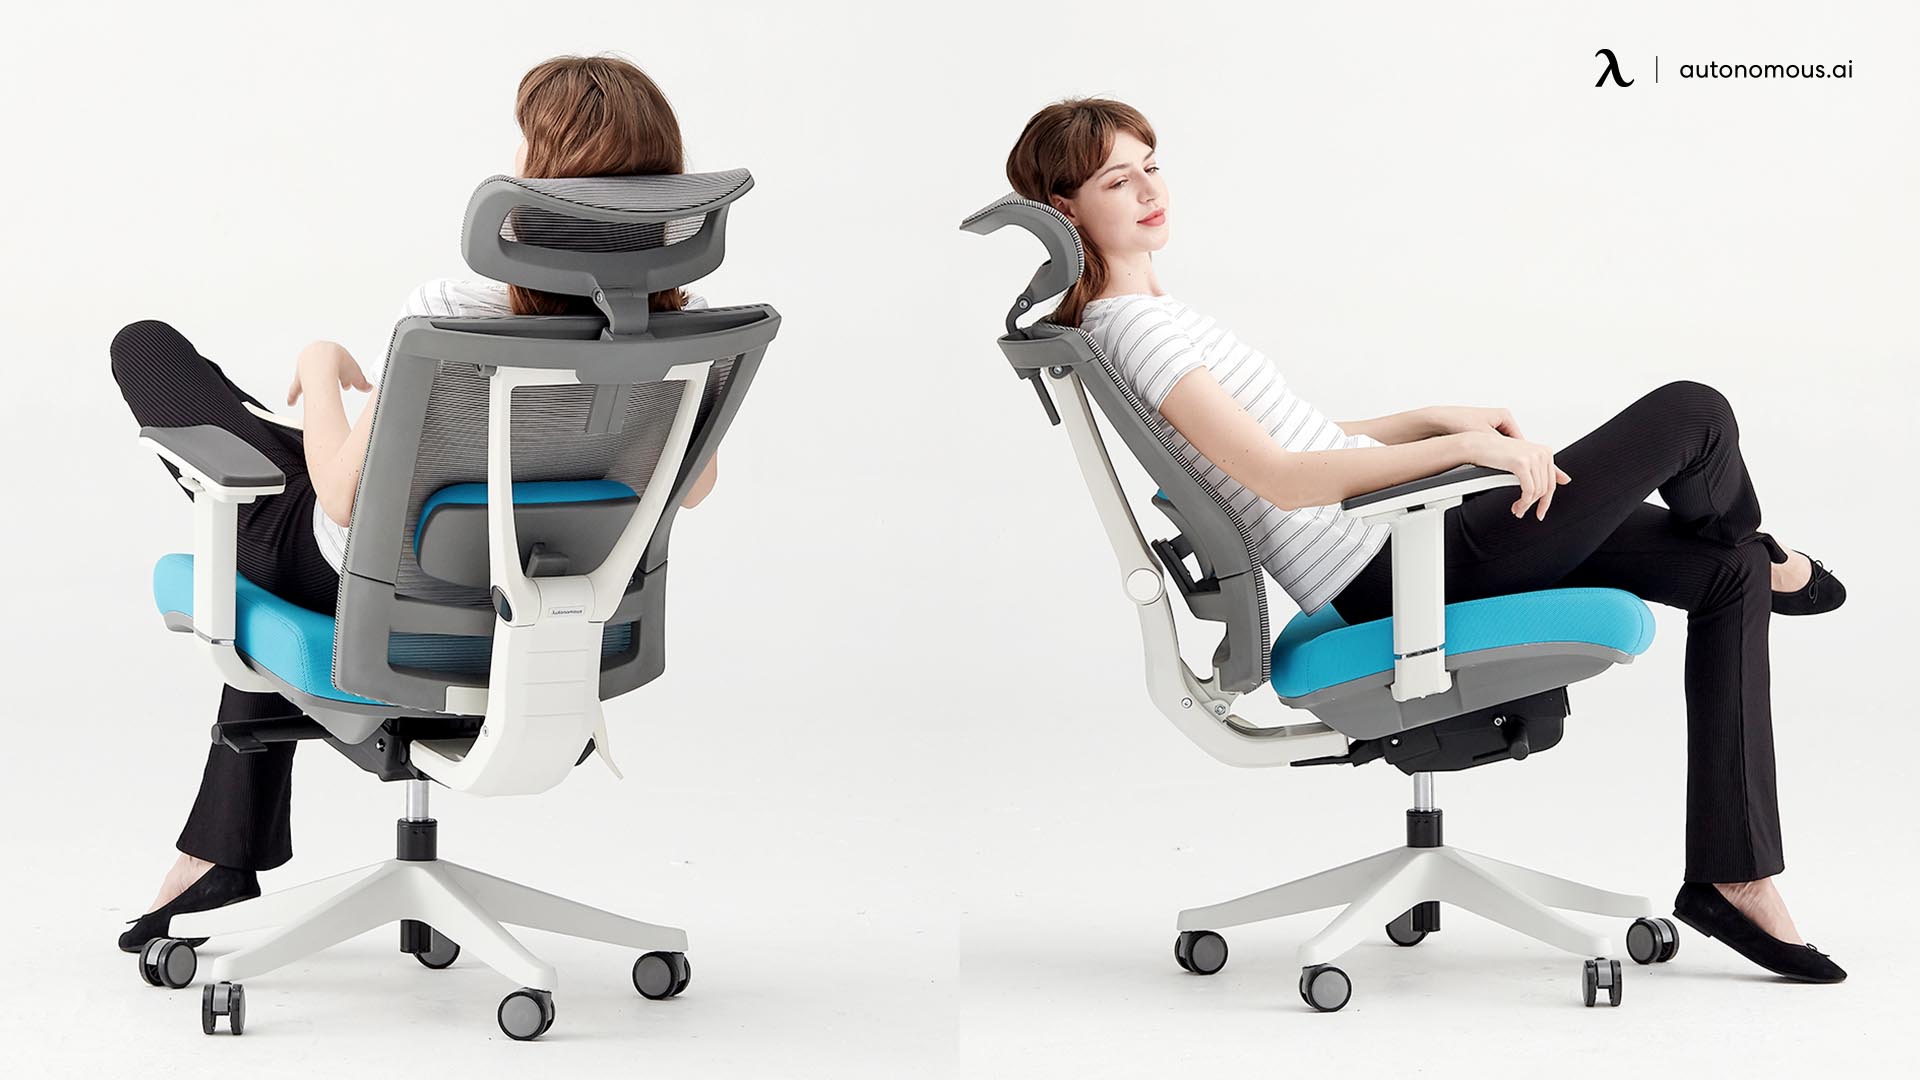 How to Choose an Ergonomic Chair with Back Support?